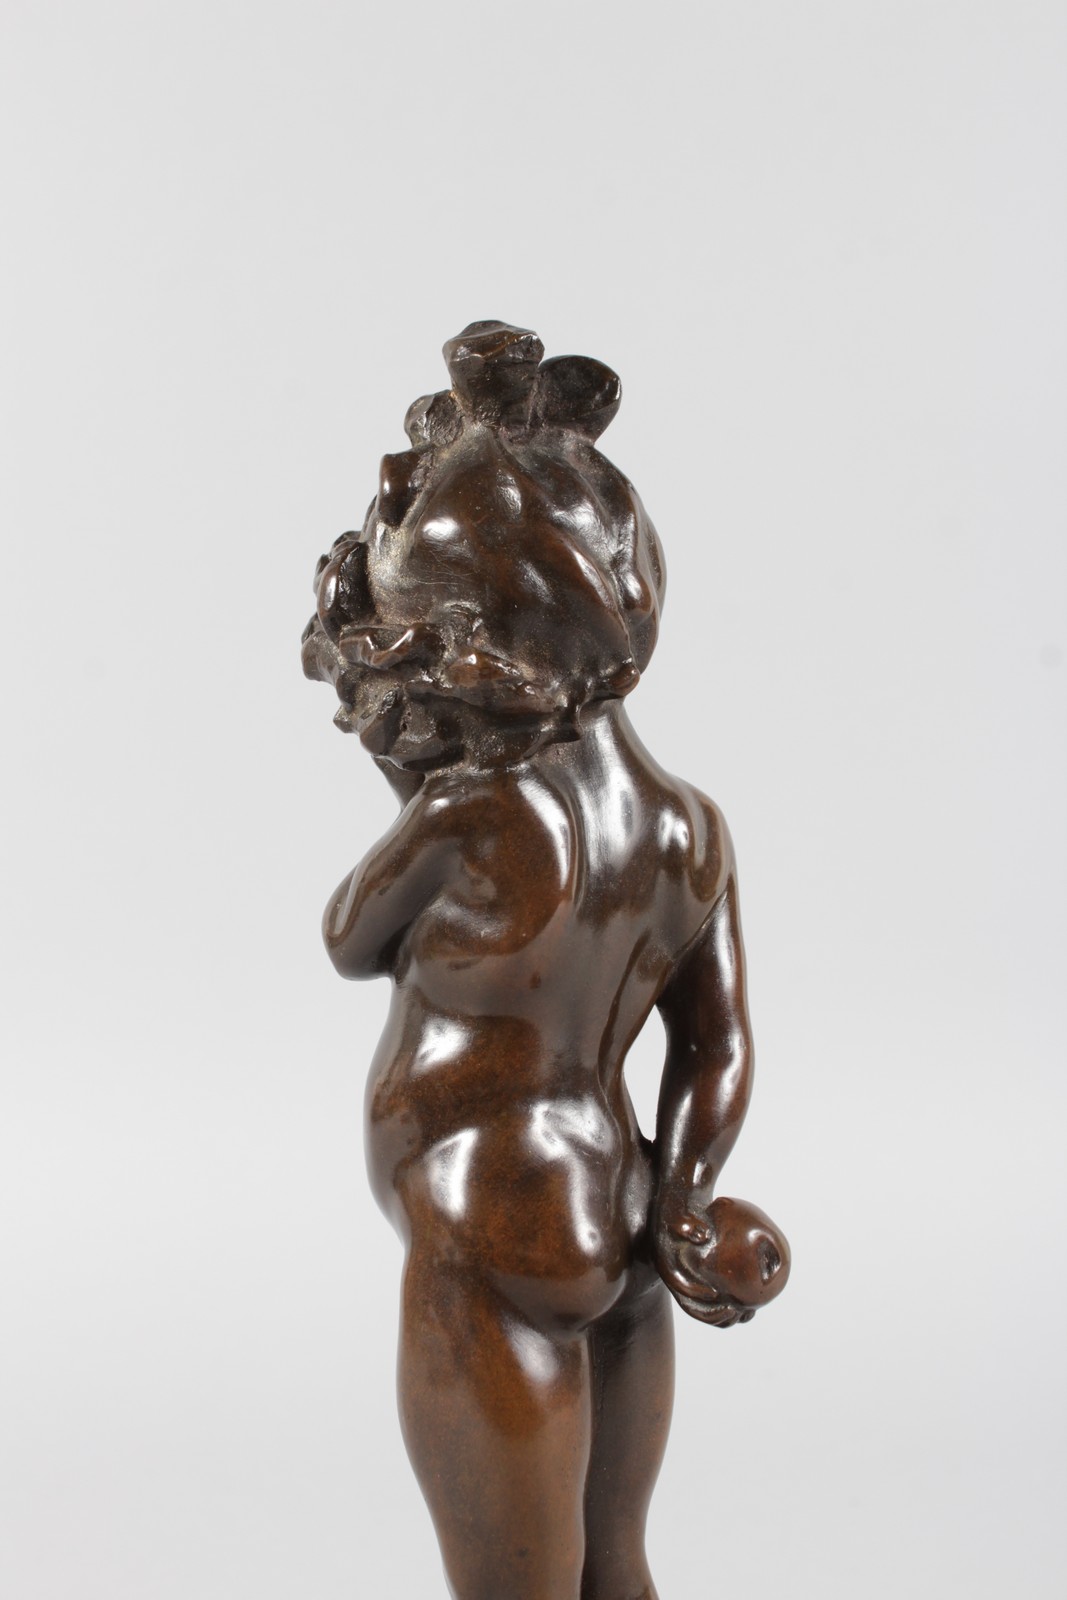 KLINKENBERG A BRONZE OF A YOUNG STANDING NUDE GIRL. Signed, on a marble base. 11ins high. - Image 4 of 6